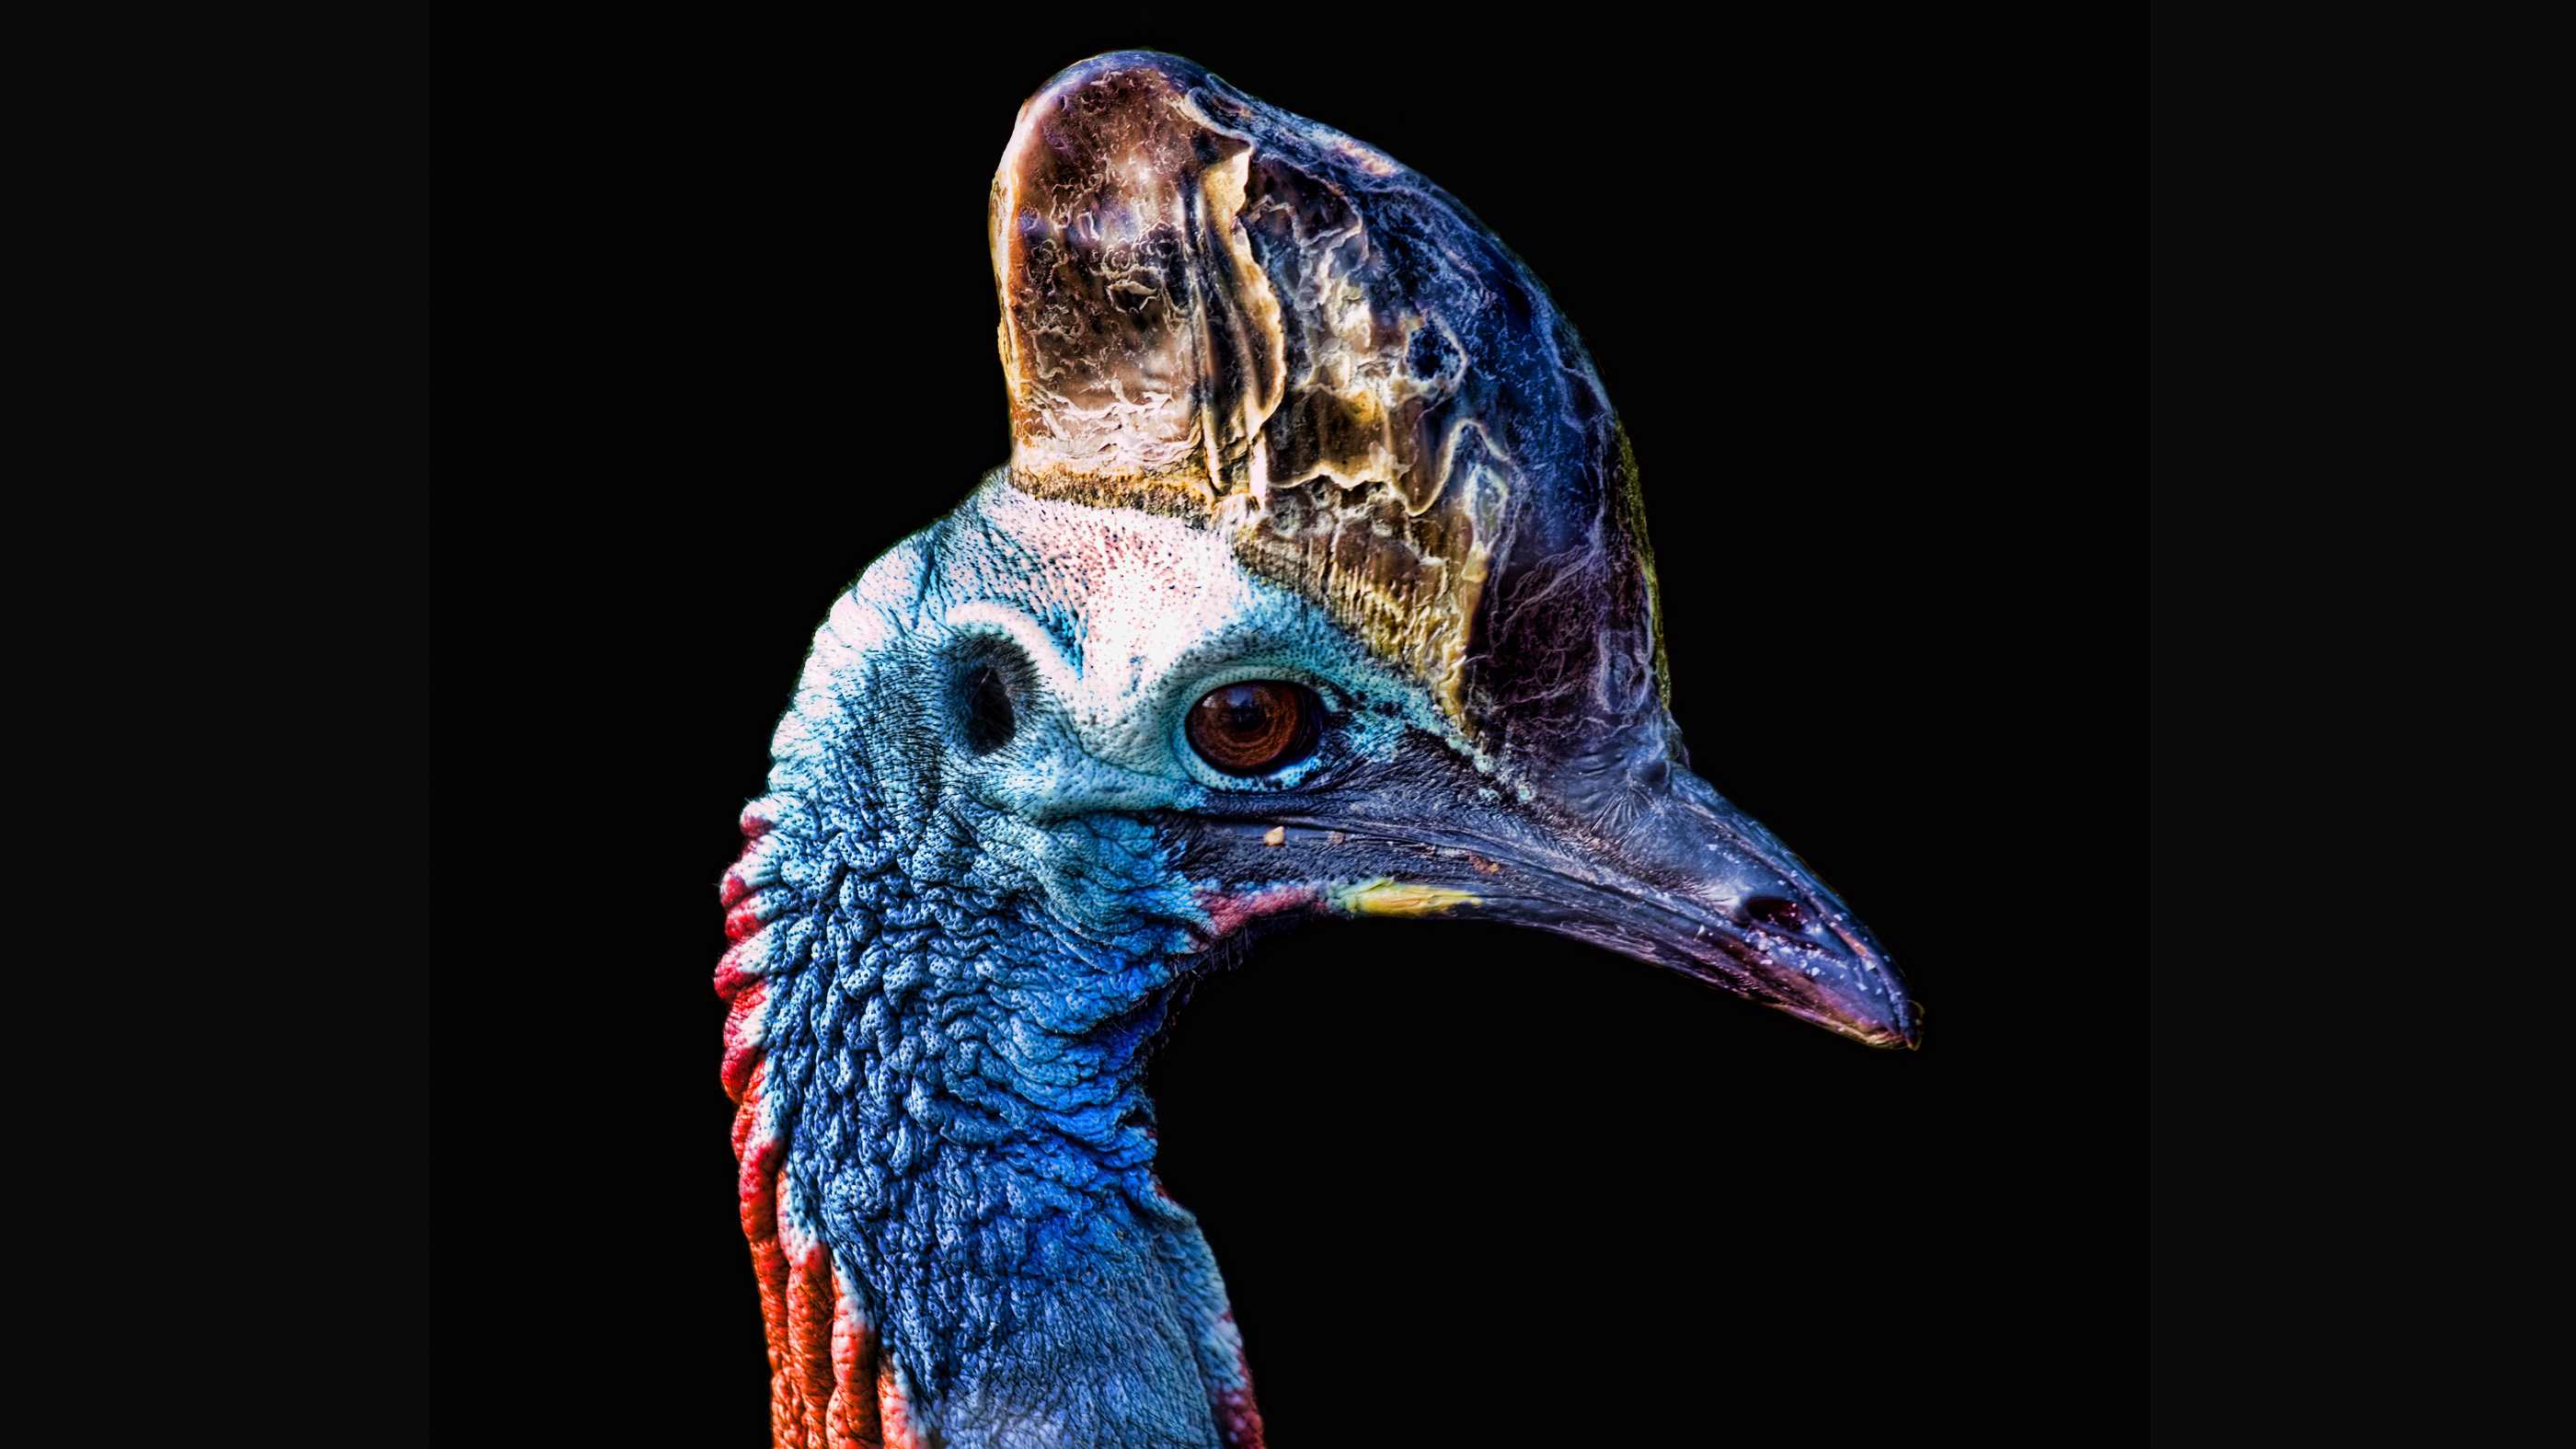 Southern cassowary is found in New Guinea as well as Queensland in northeastern Australia.